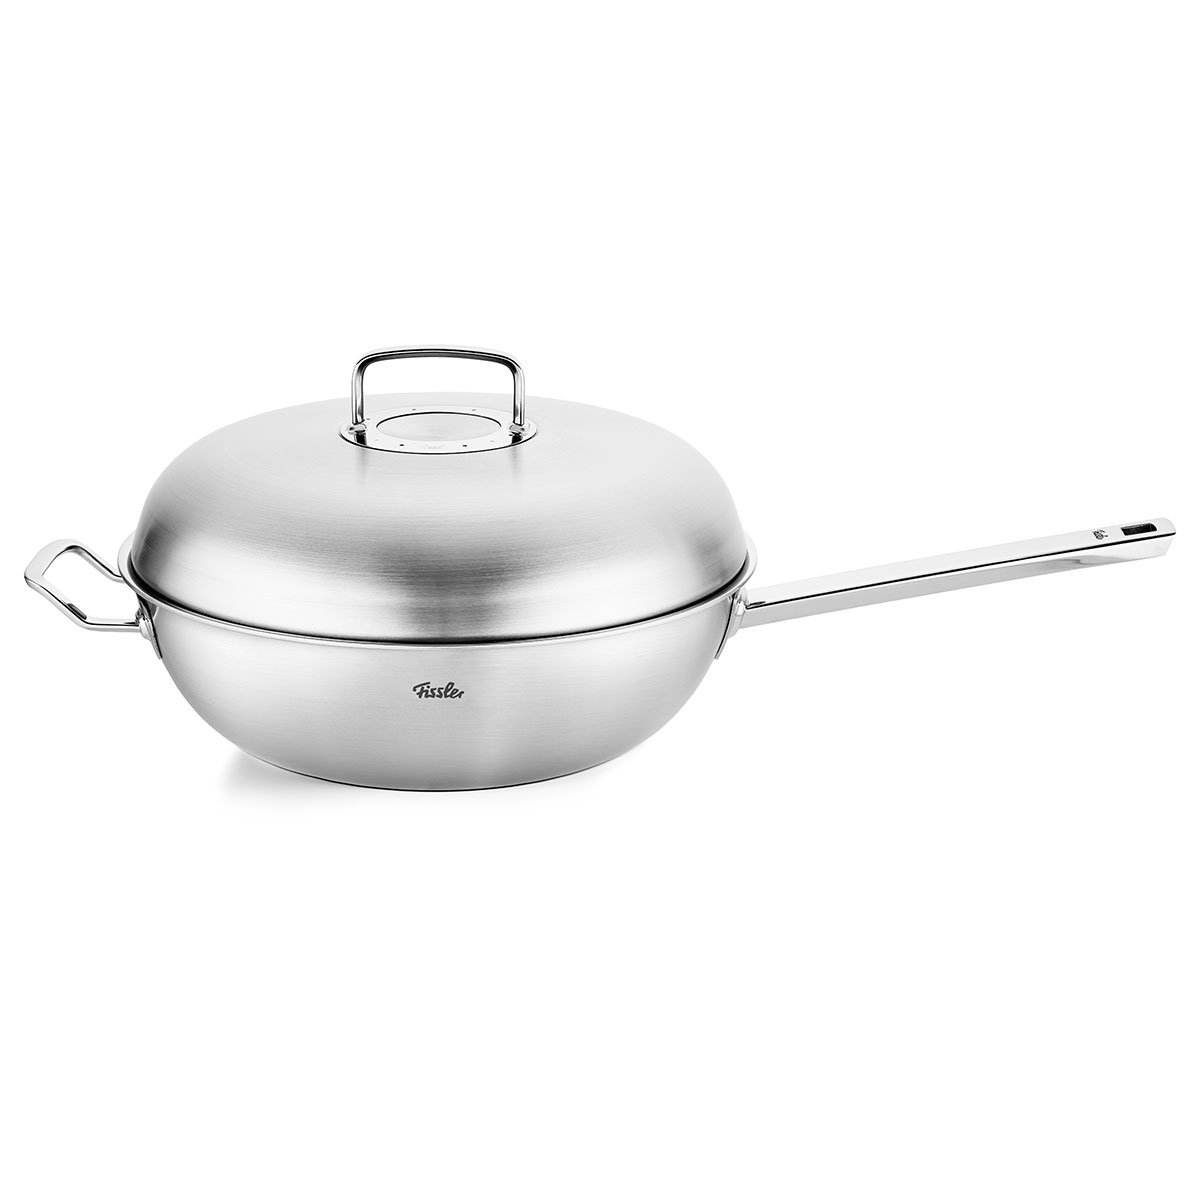 12 in. Multi-Ply Clad Stainless Steel Frying Pan with high dome lid, Silver